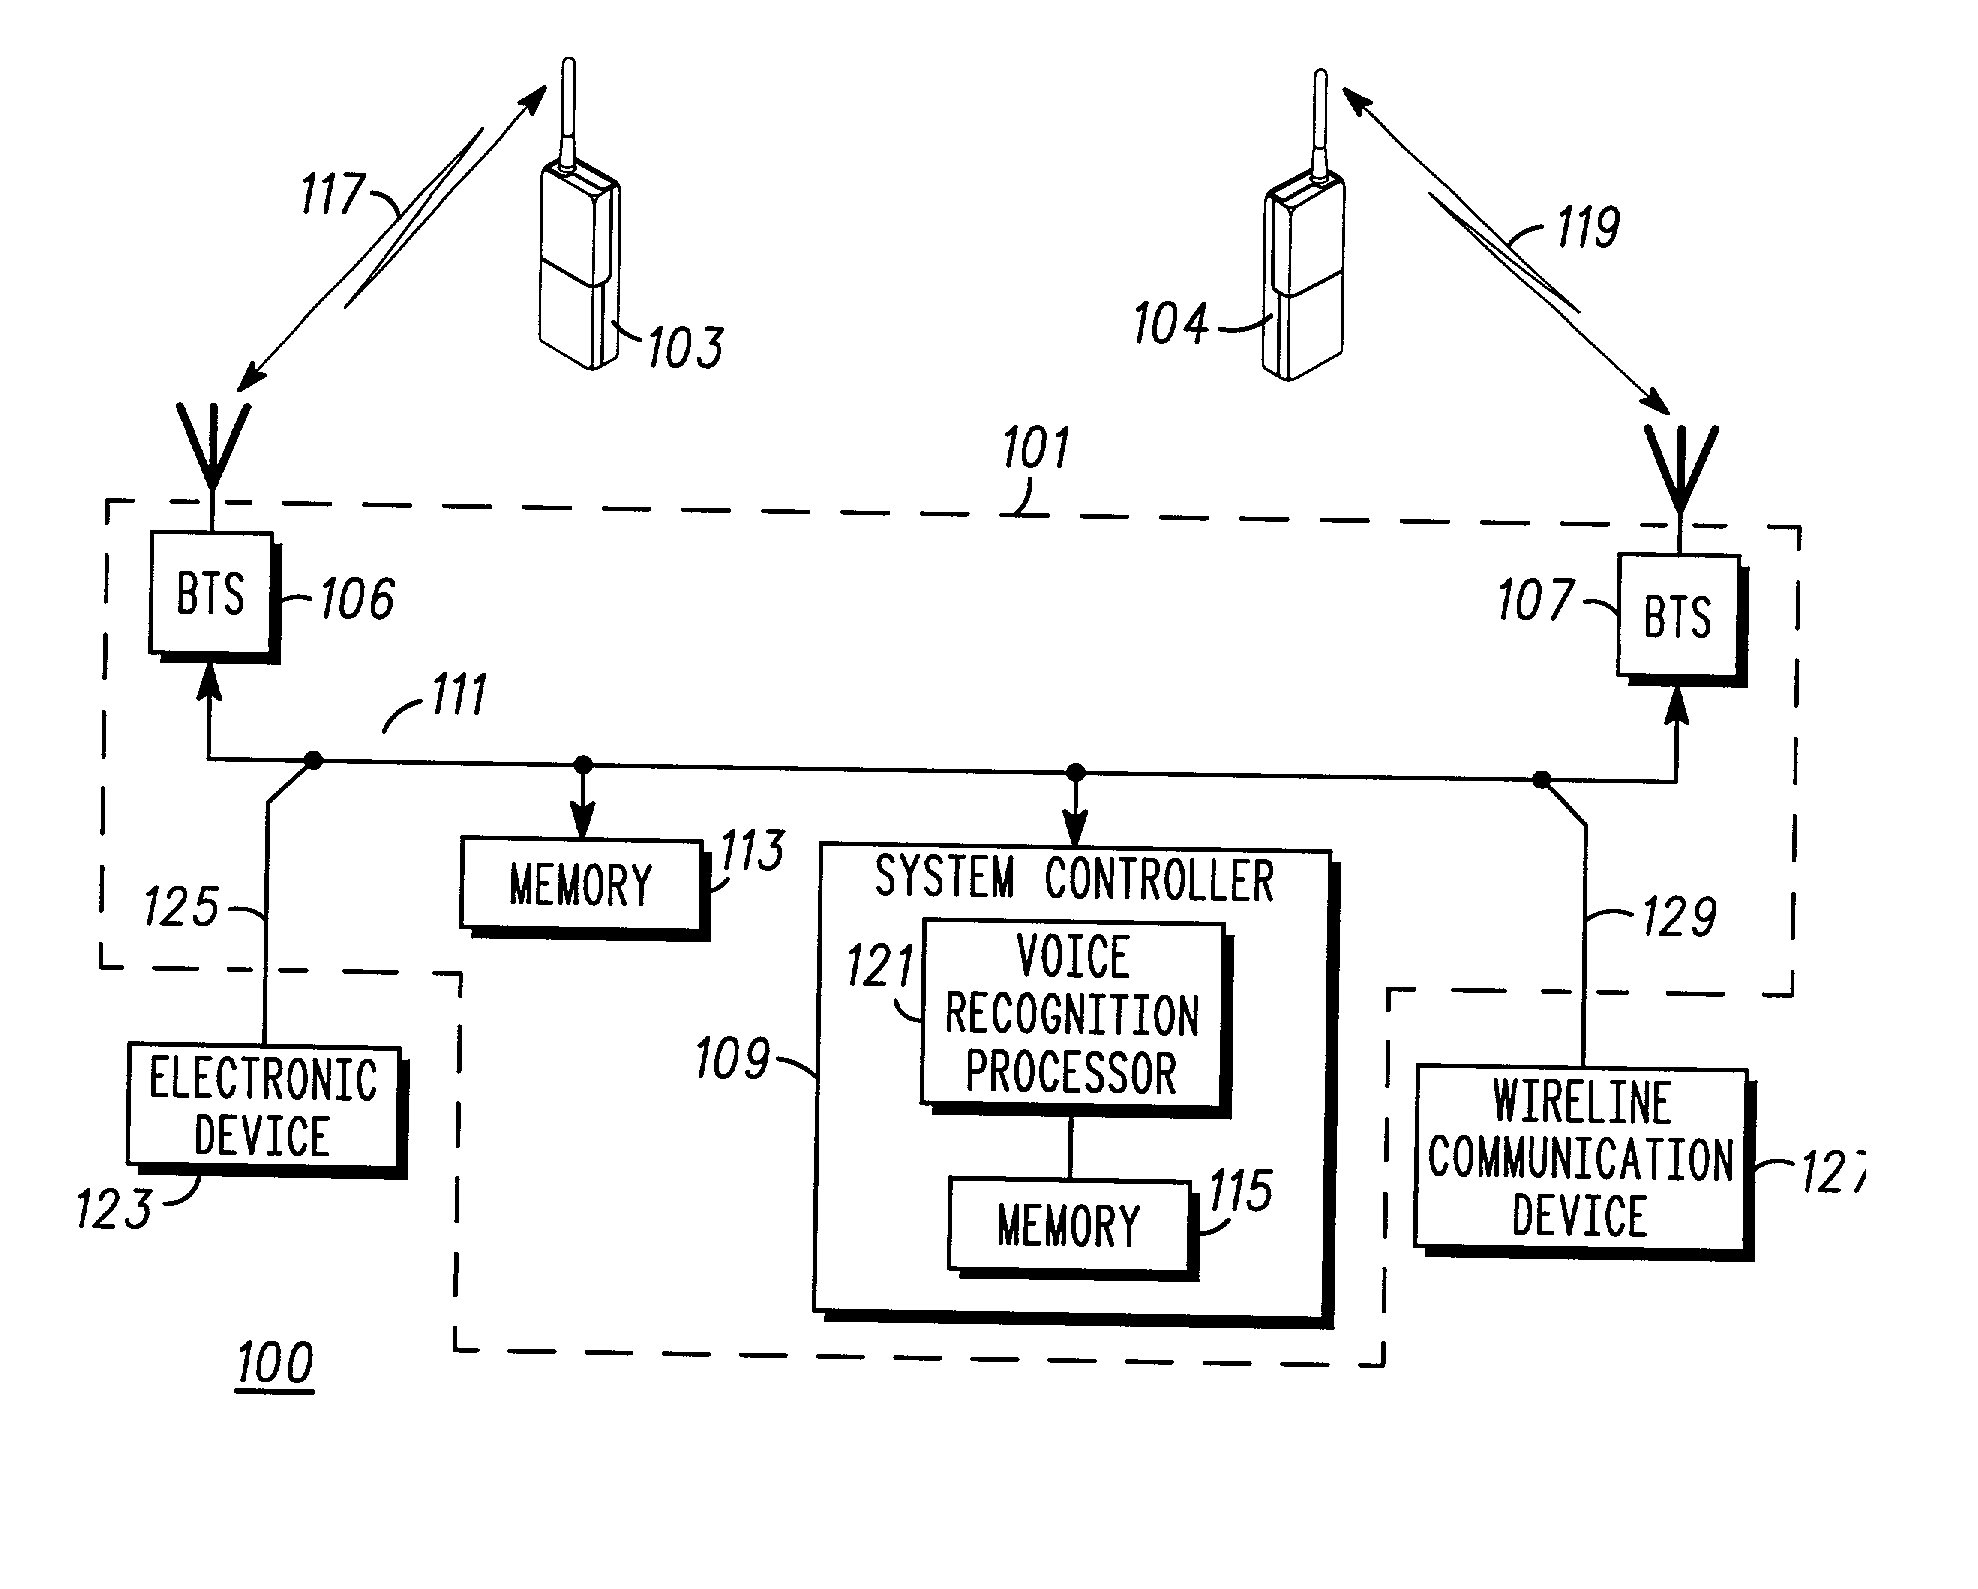 Method and apparatus for providing voice recognition service to a wireless communication device